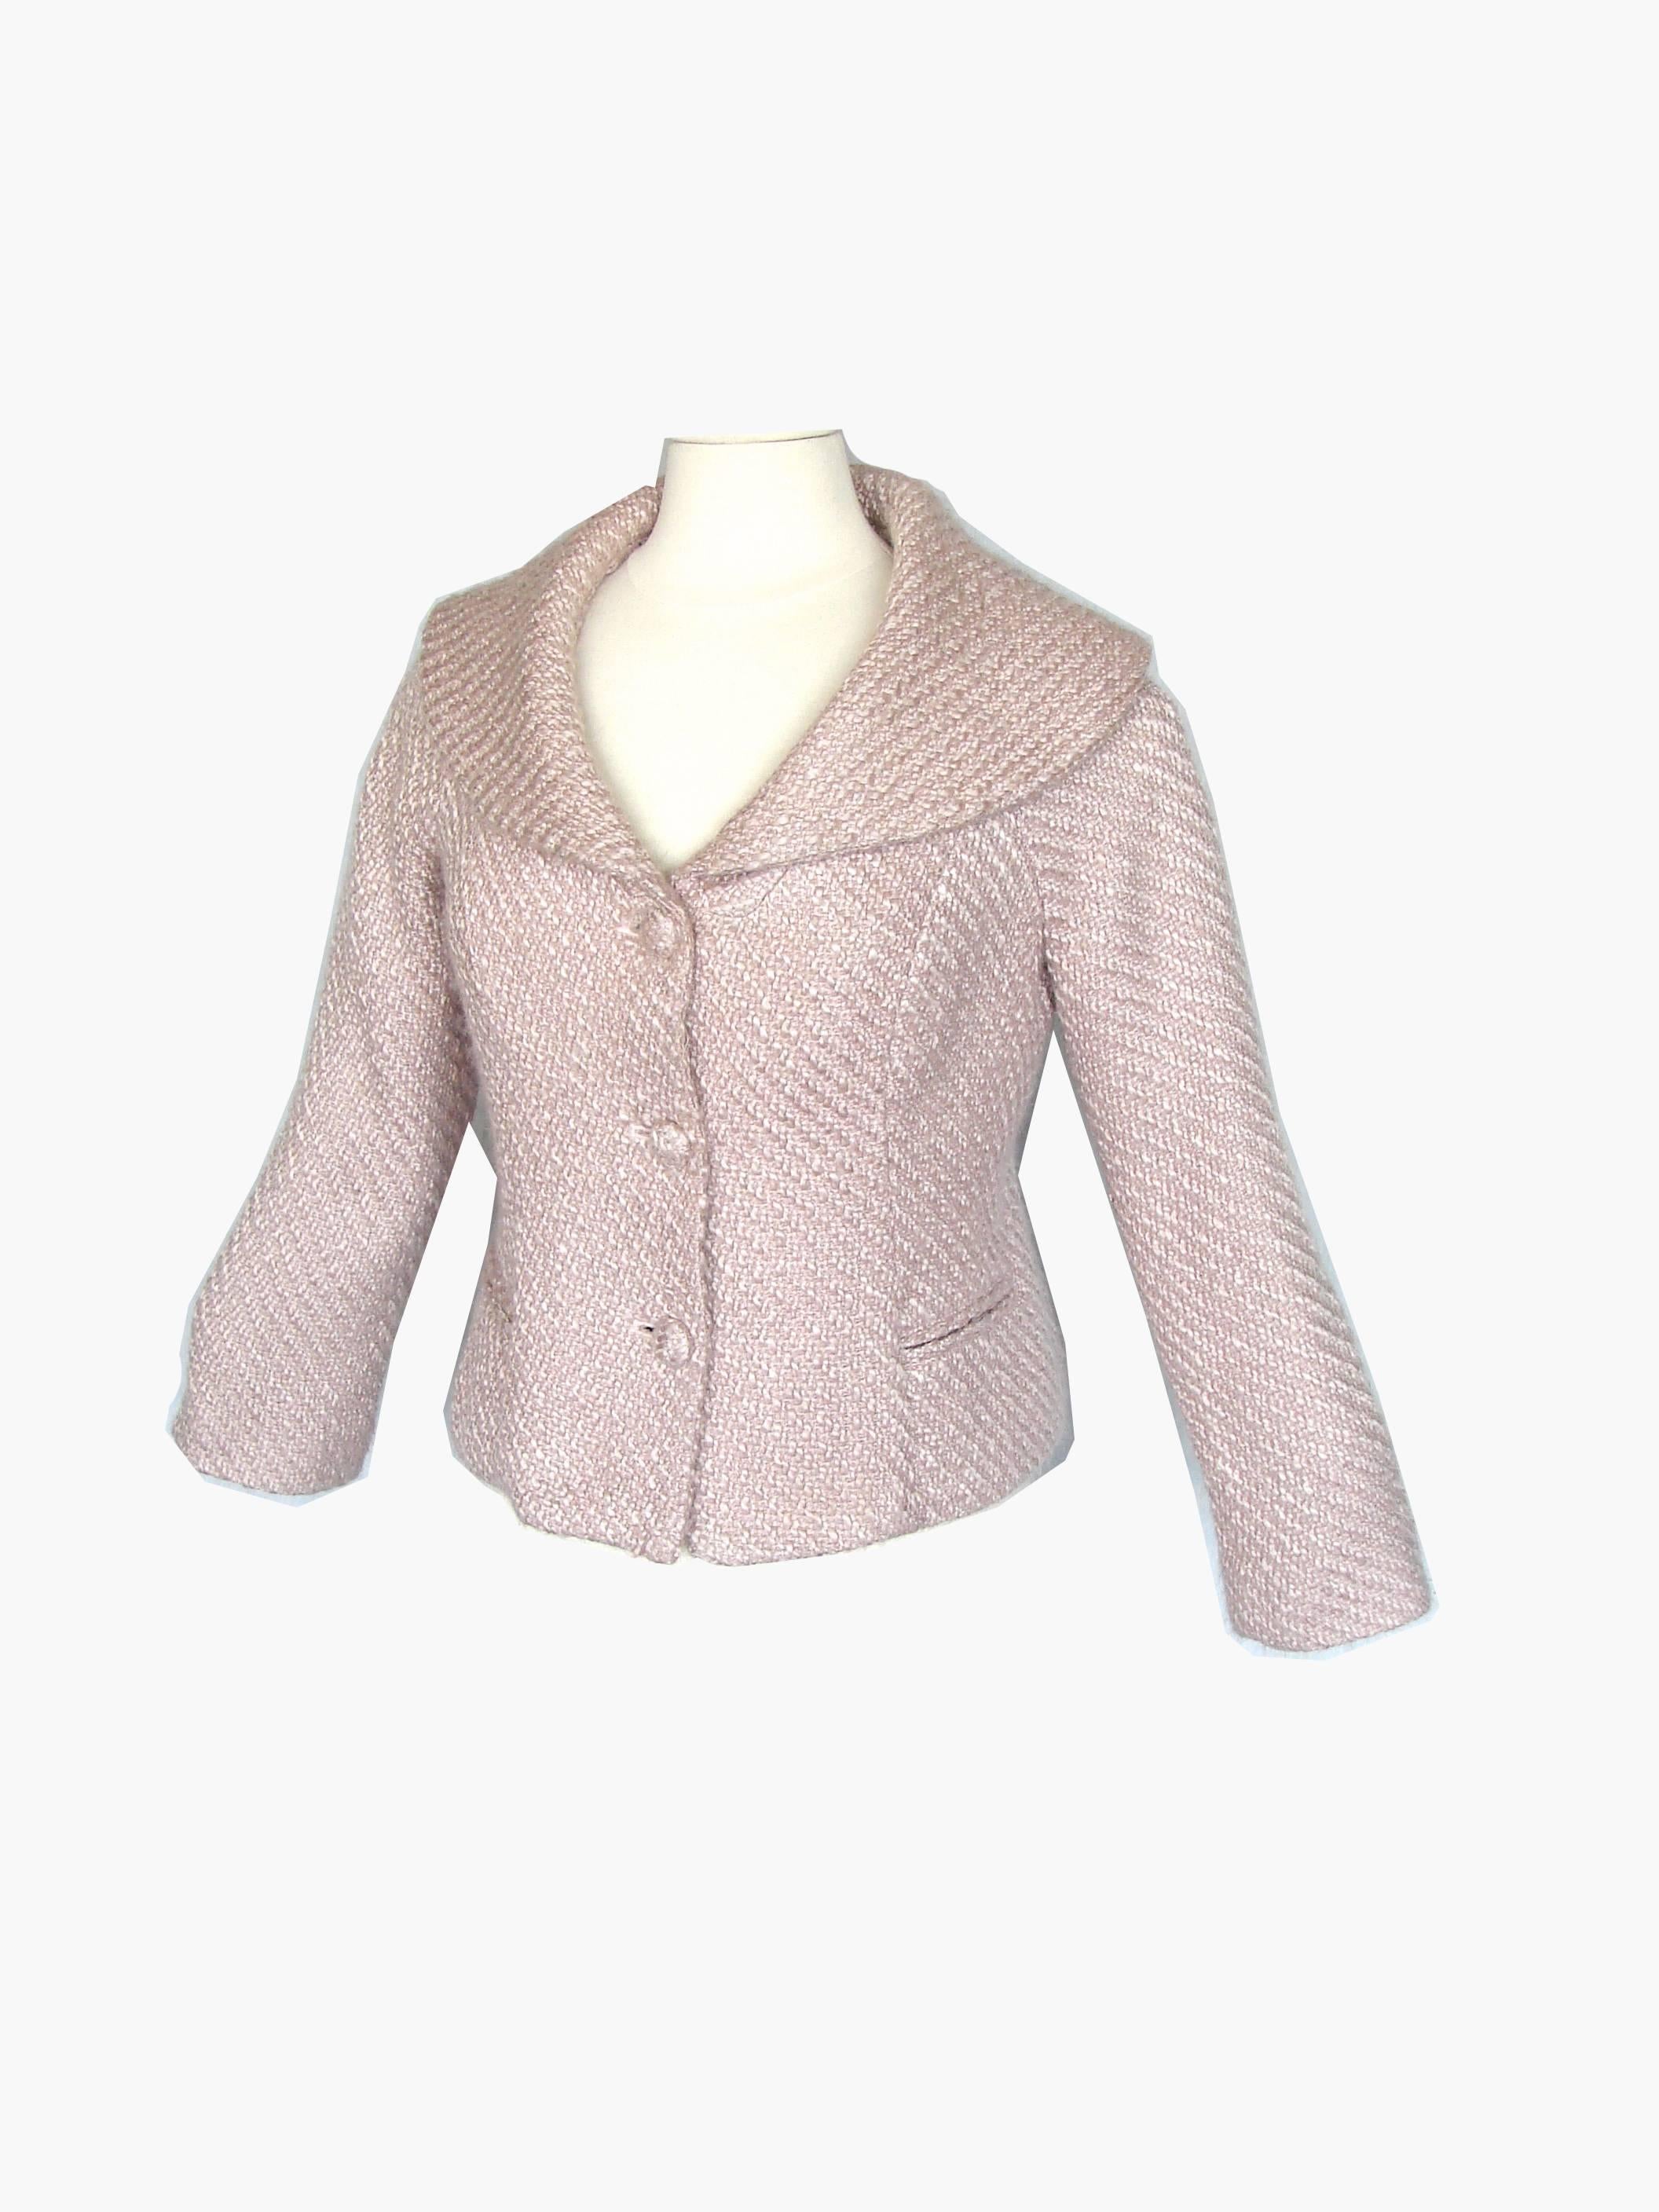 This little knit jacket was made by Pierre Cardin in the 1980s.  Made from a supple pale pink and white knit, it features a shawl collar and fastens with three knit covered buttons.  Fully-lined in white Pierre Cardin logo fabric.  In excellent